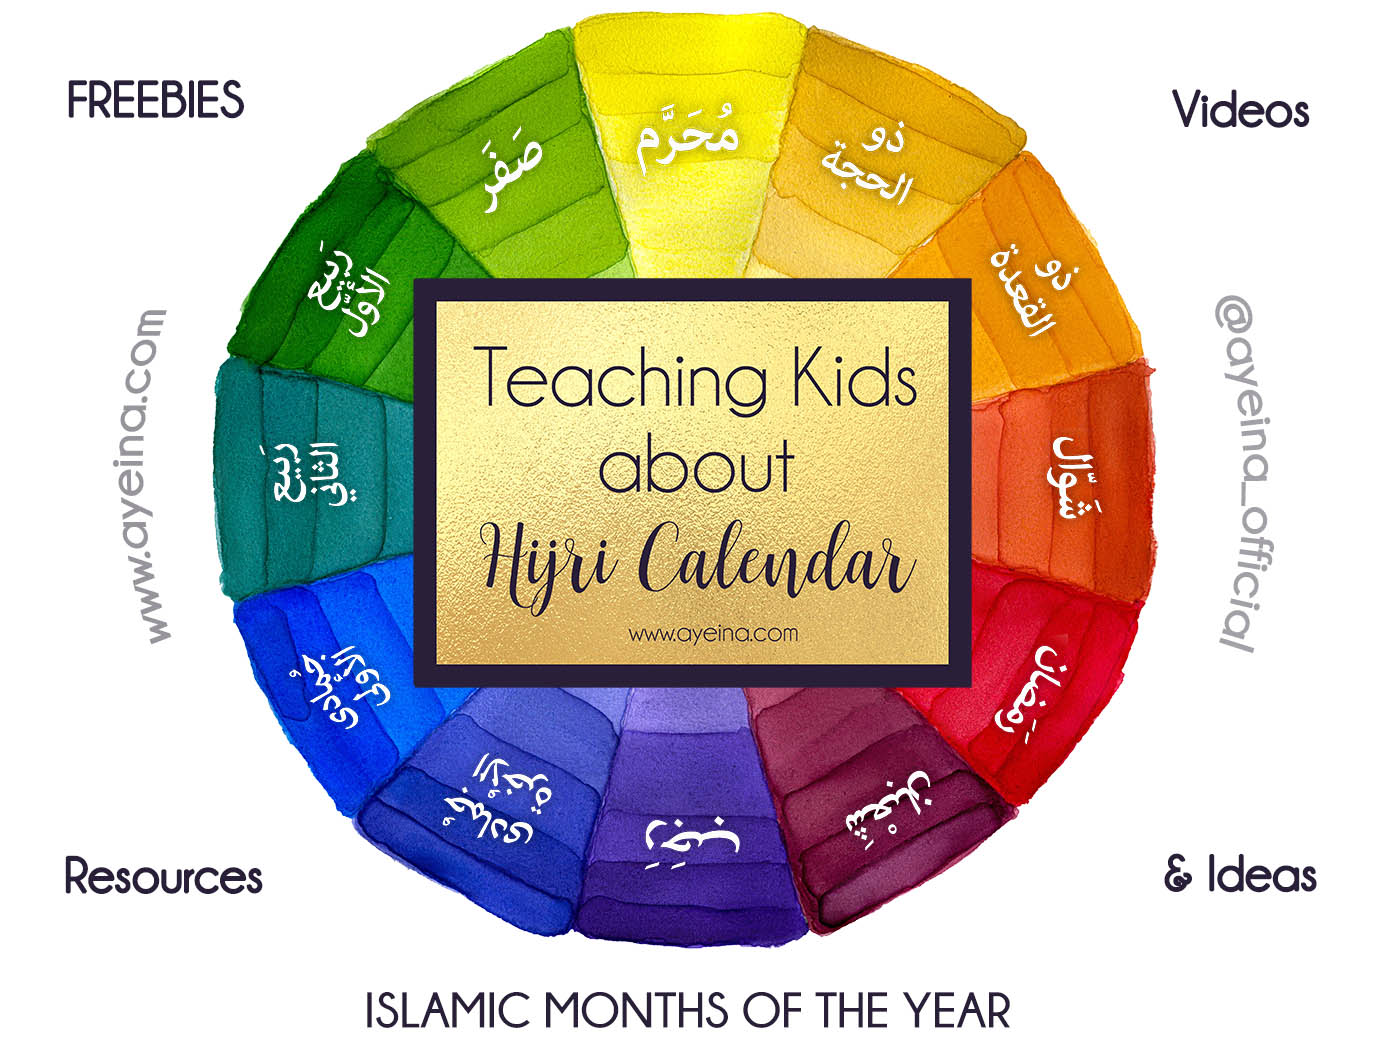 islamic months, الشهور الهجريه , best ways to teach islam to kids,games and ideas for islamic learning, free printable, hijri calendar, arabic cartoons without music, months in Islam, resources to learn islam for kids, ideas for fun learning, muslim homeschooling, islamic homeschool, colorful watercolor wheel, moon phases of the lunar month, hijri calendar for kids, islamic crafts for kids, islamic free printables for children, raising muslim kids, islamic parenting, muslim mum, muslimah blogger, muslimah parenting blogger, uae blogger, ksa blogger, pakistani blogger, islamic products for kids, mini muslims, english rhymes without music, little muslims, zaky's adventures,